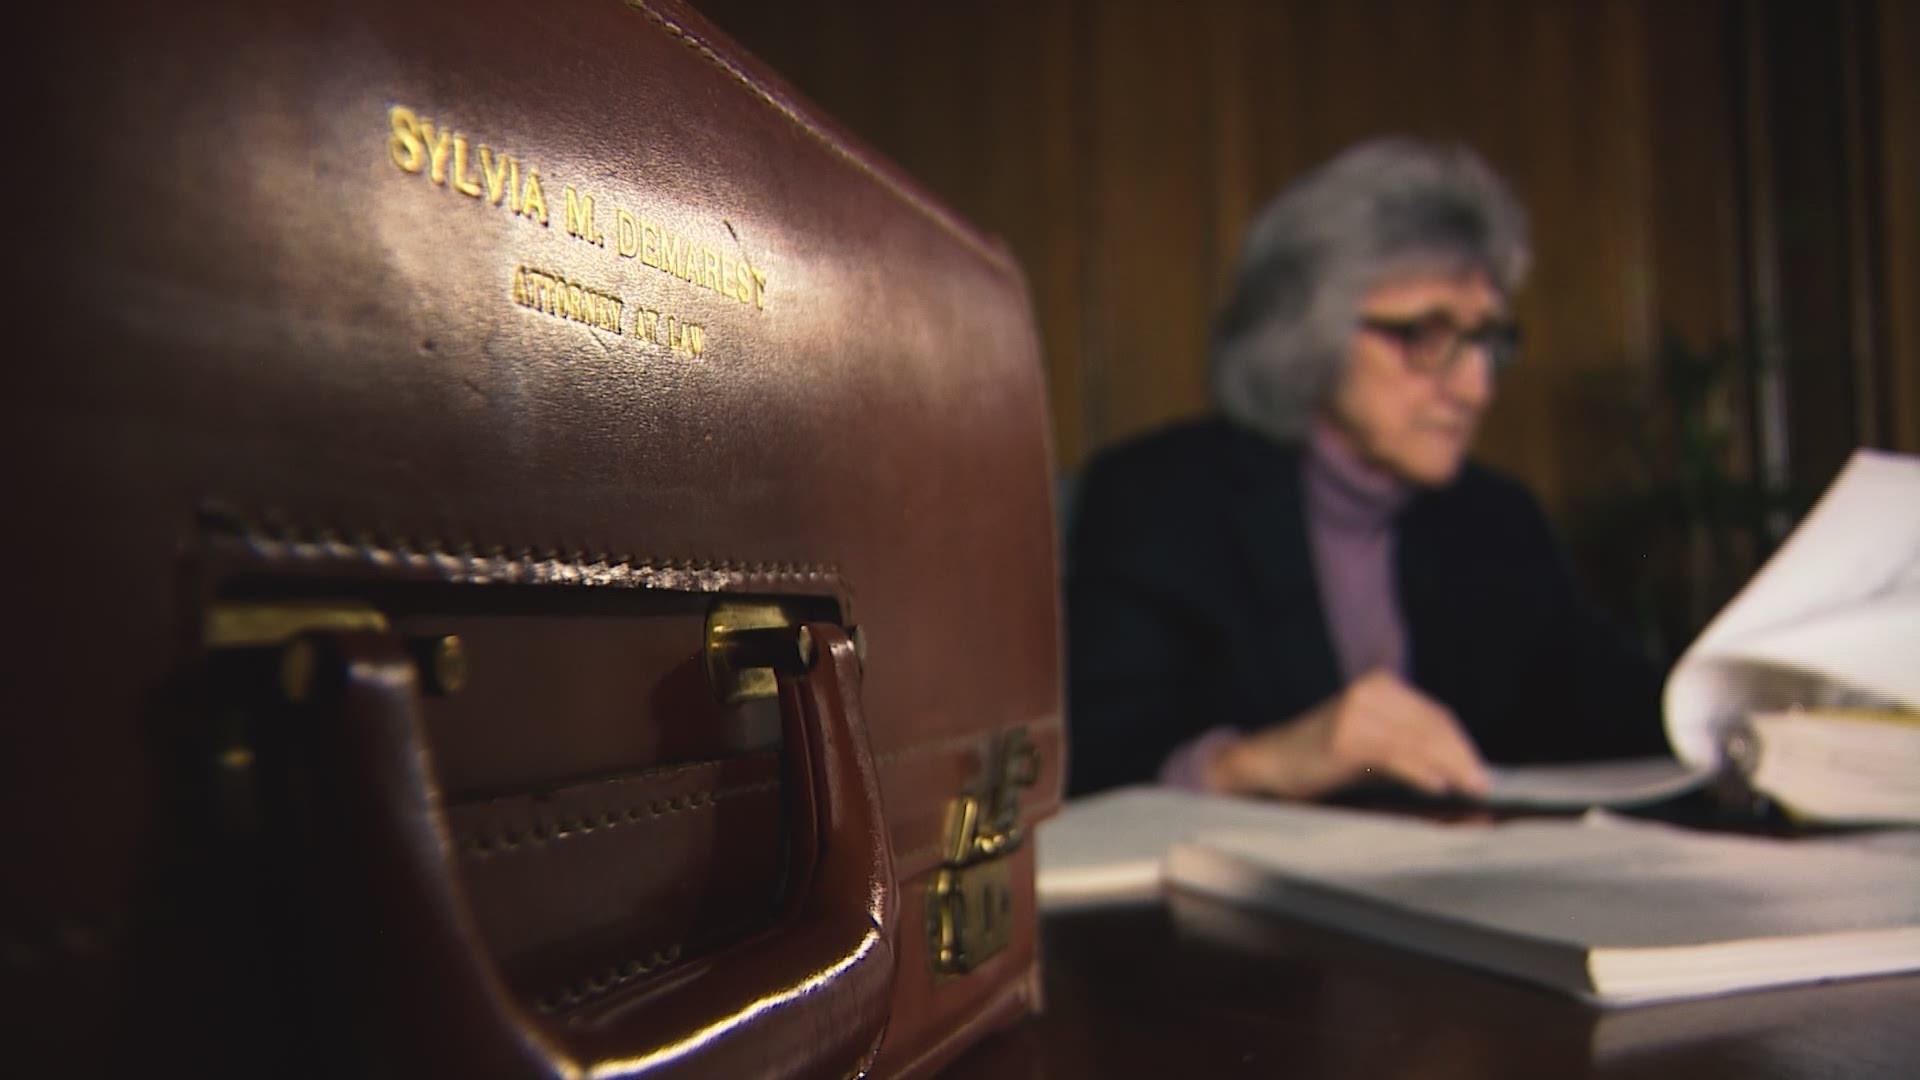 Sylvia Demarest helped create a list of publicly accused priests after winning a $119 million verdict she hoped "wakes up the pope." Decades later, she's still waiting to see change.